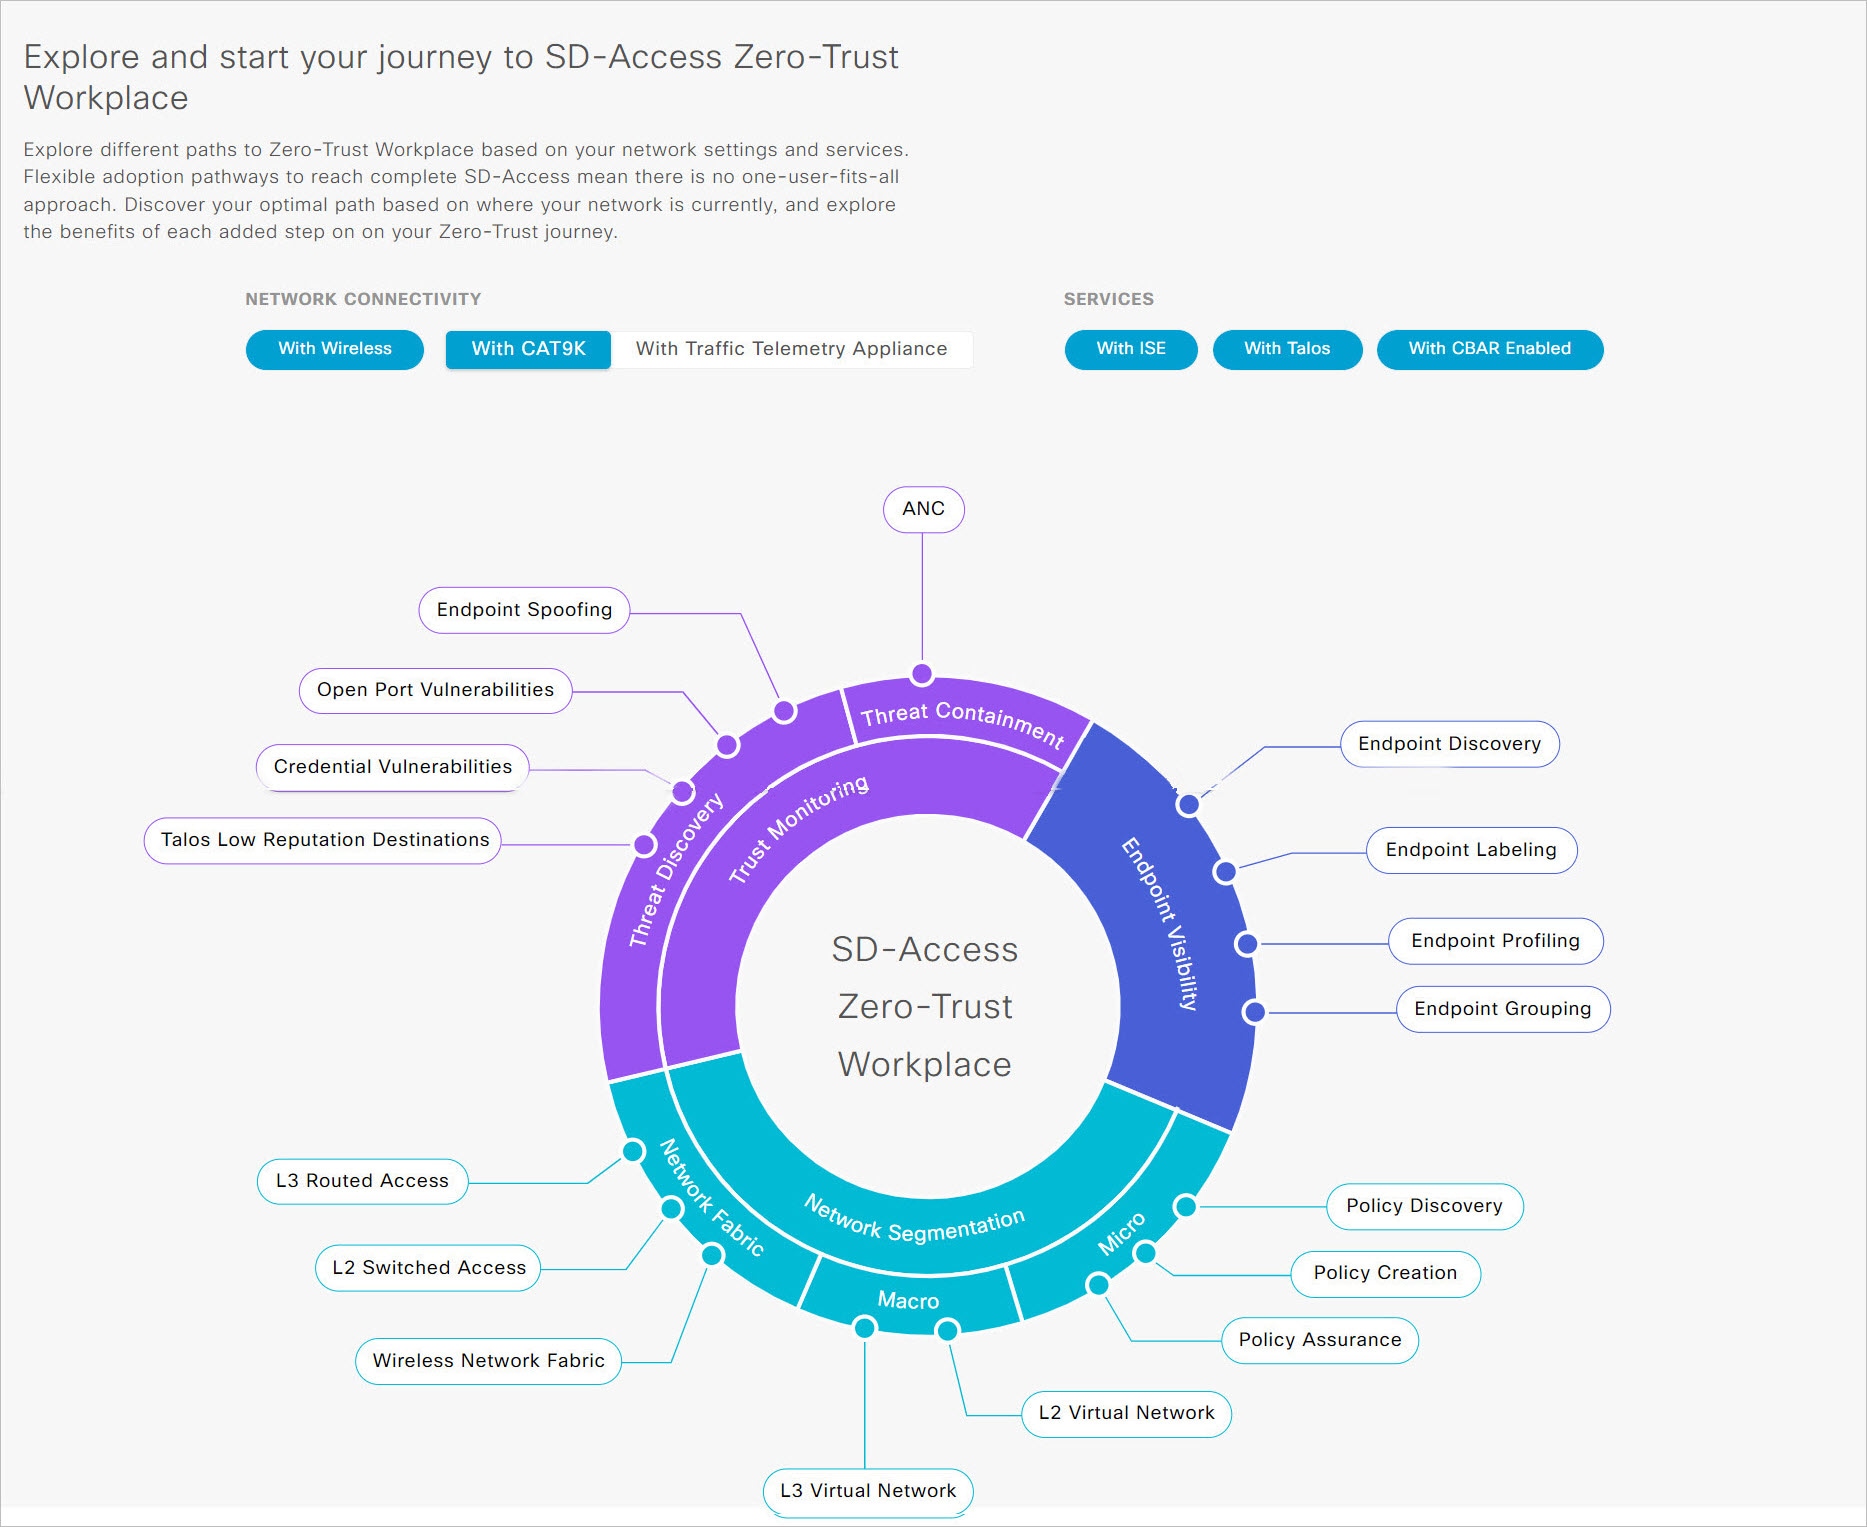 The dashboard displays a diagram of the different pathways to Cisco SD-Access Zero-Trust Workplace based on your network settings and services.